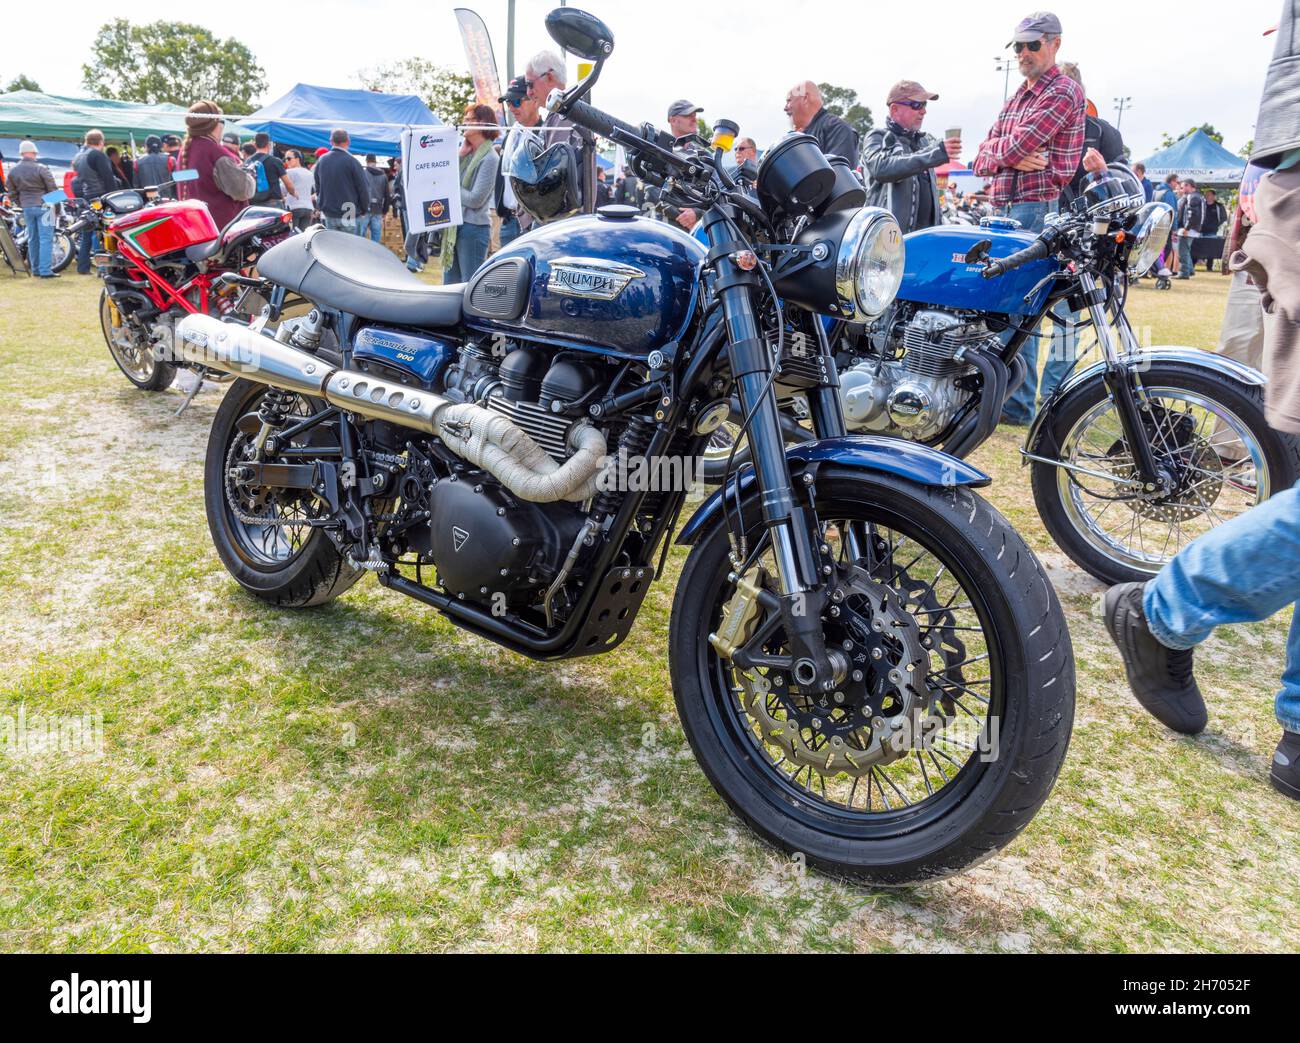 The Triumph Scrambler is a British motorcycle made by Triumph Motorcycles. Launched in 2006, this customised version was at a bike show near brisbane Stock Photo